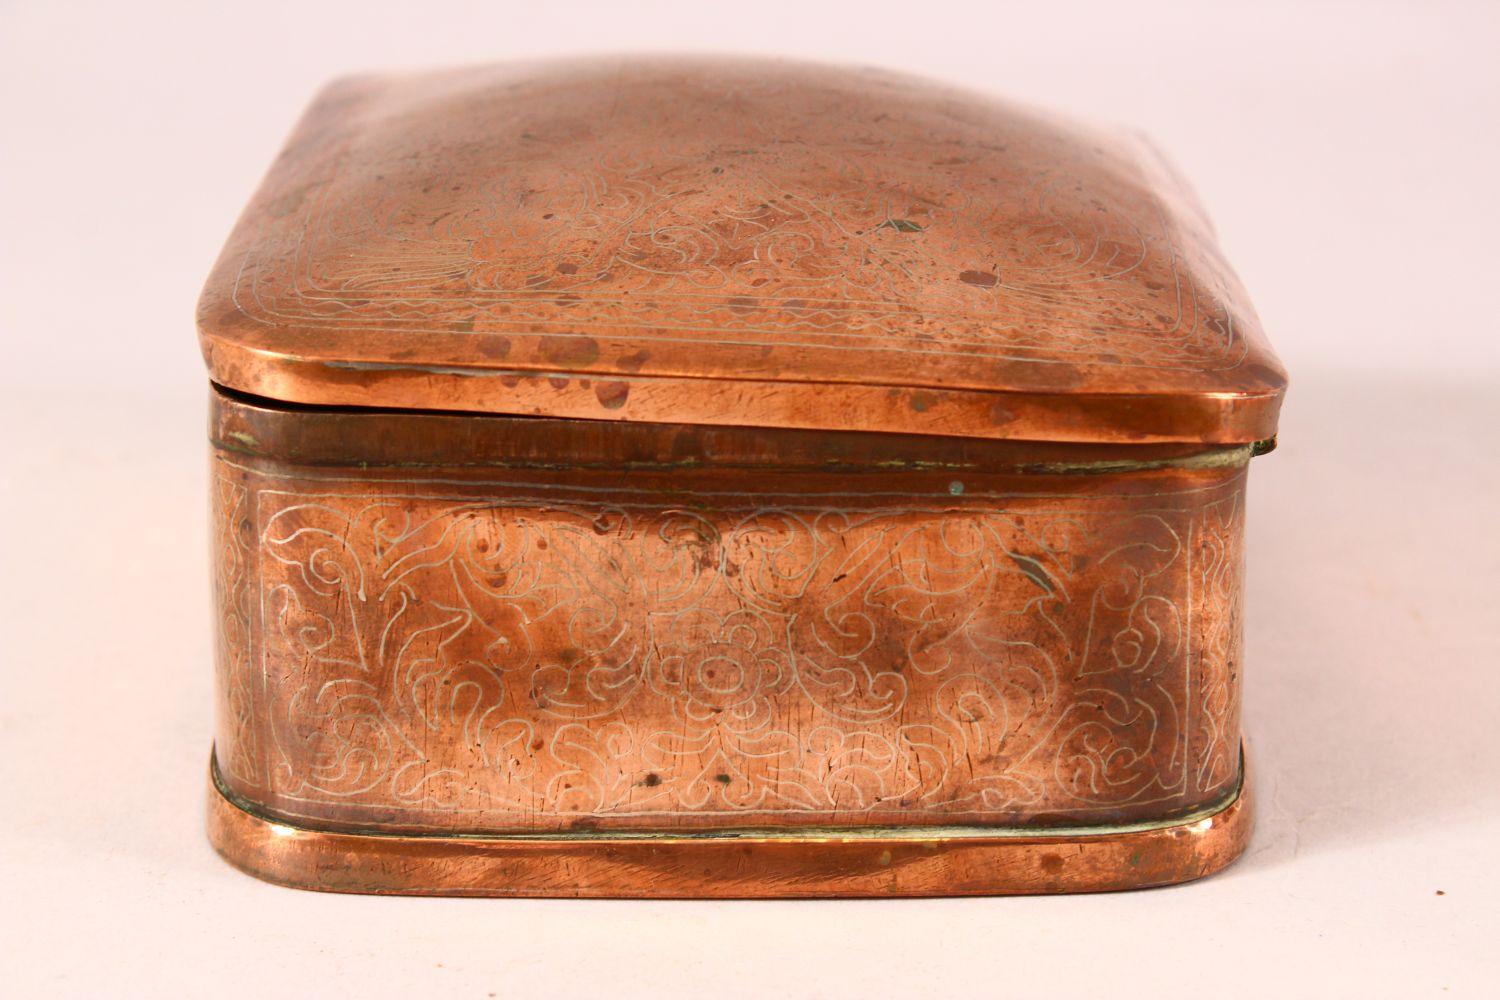 A FINE 19TH CENTURY SRI LANKAN OR BURMESE SILVER INLAID COPPER BOX - decorated with silver inlay - Image 2 of 7